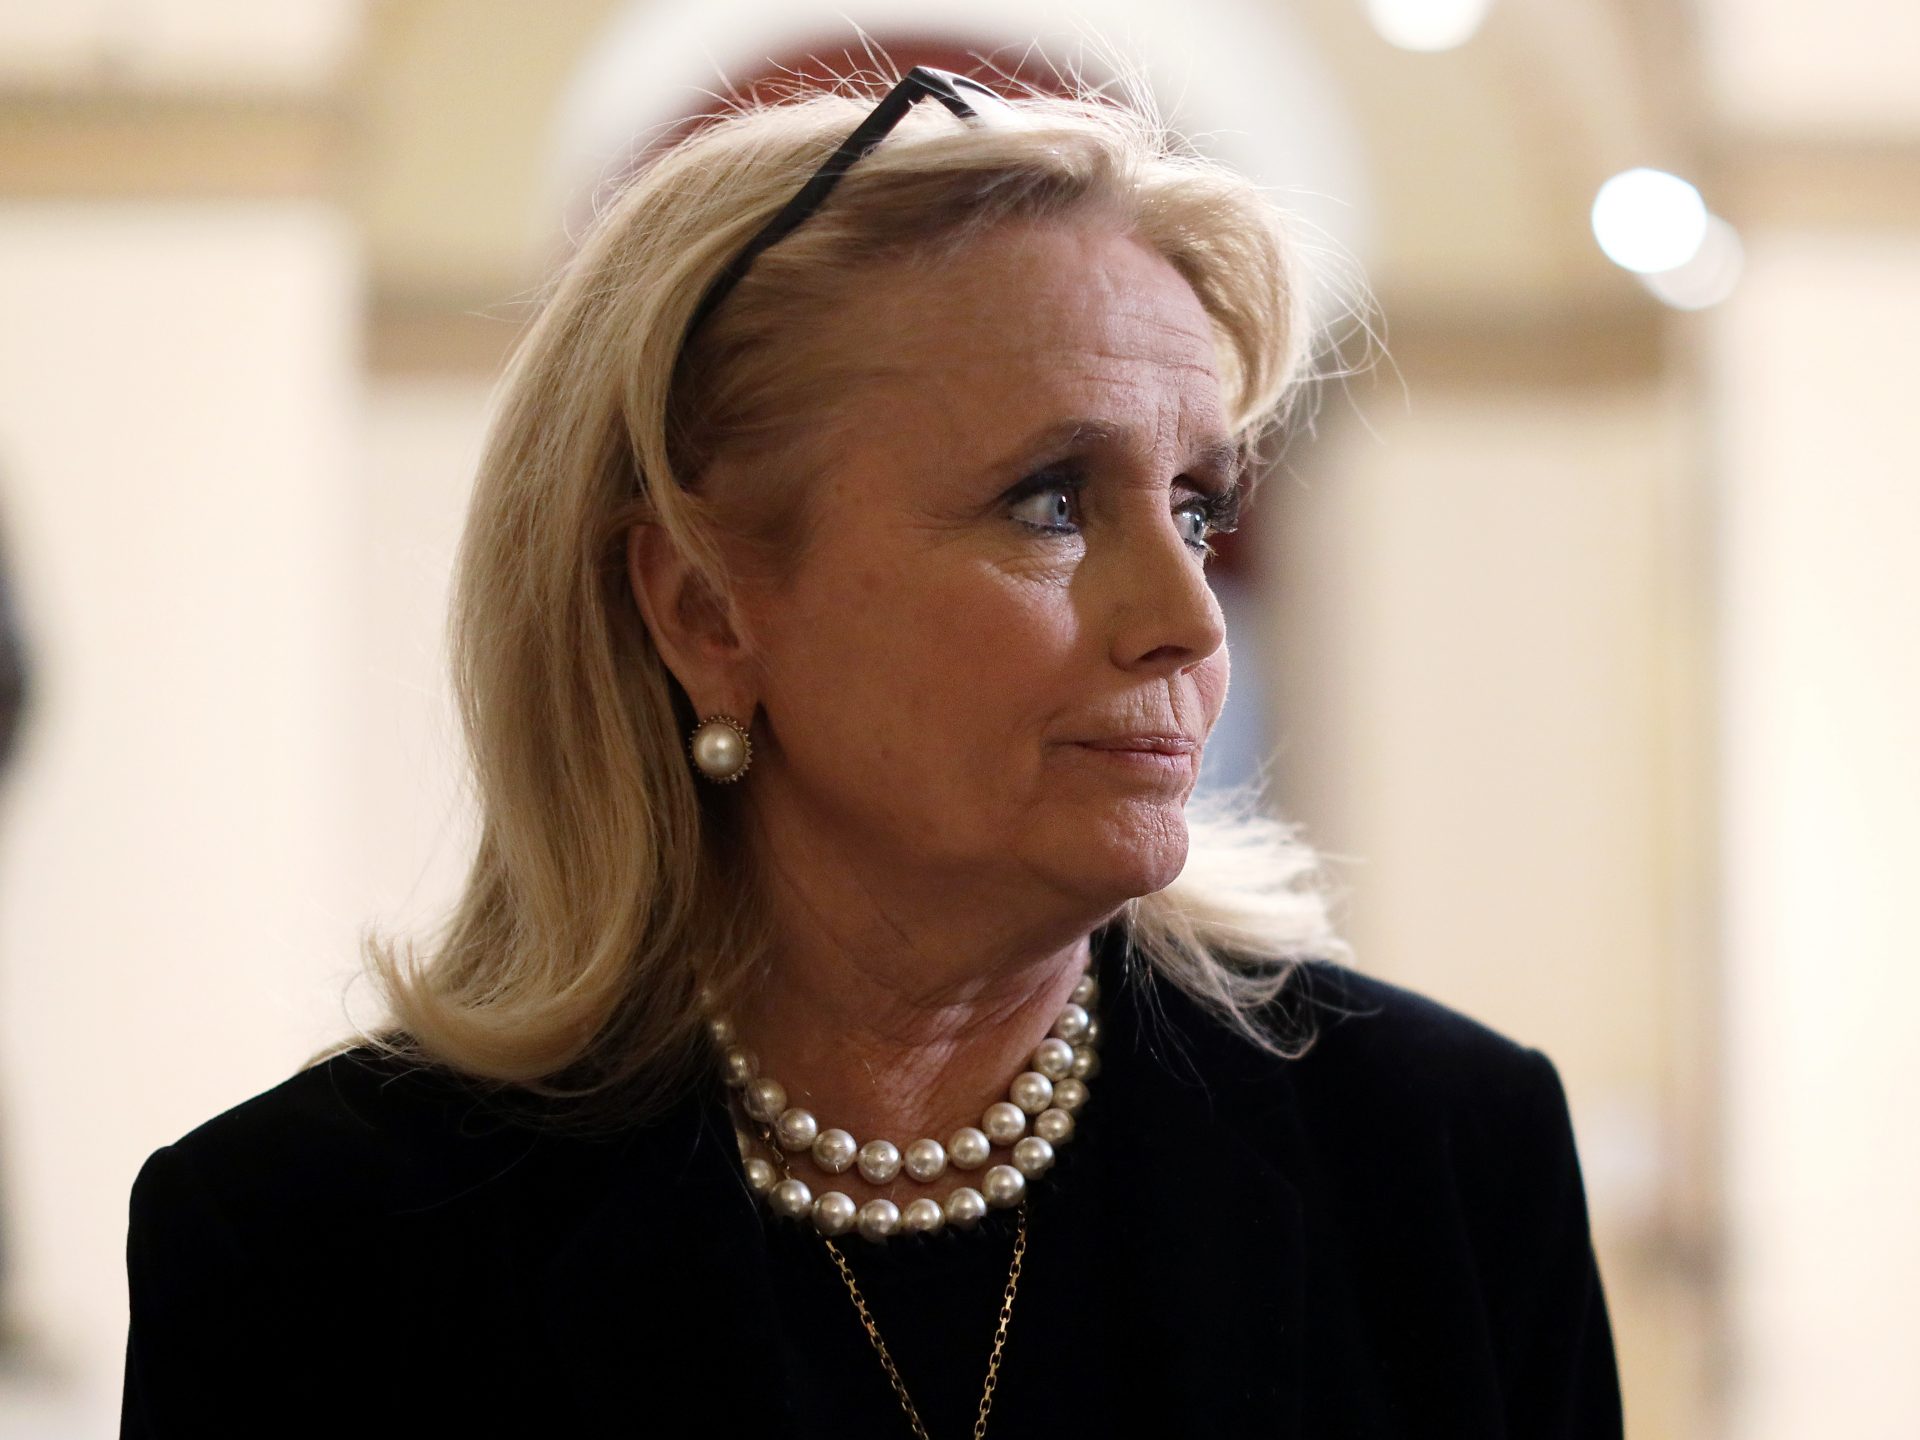 Representative Debbie Dingell, D-MI, was the target of a barb from Trump about her late husband that most politicians would have seen as off-limits.